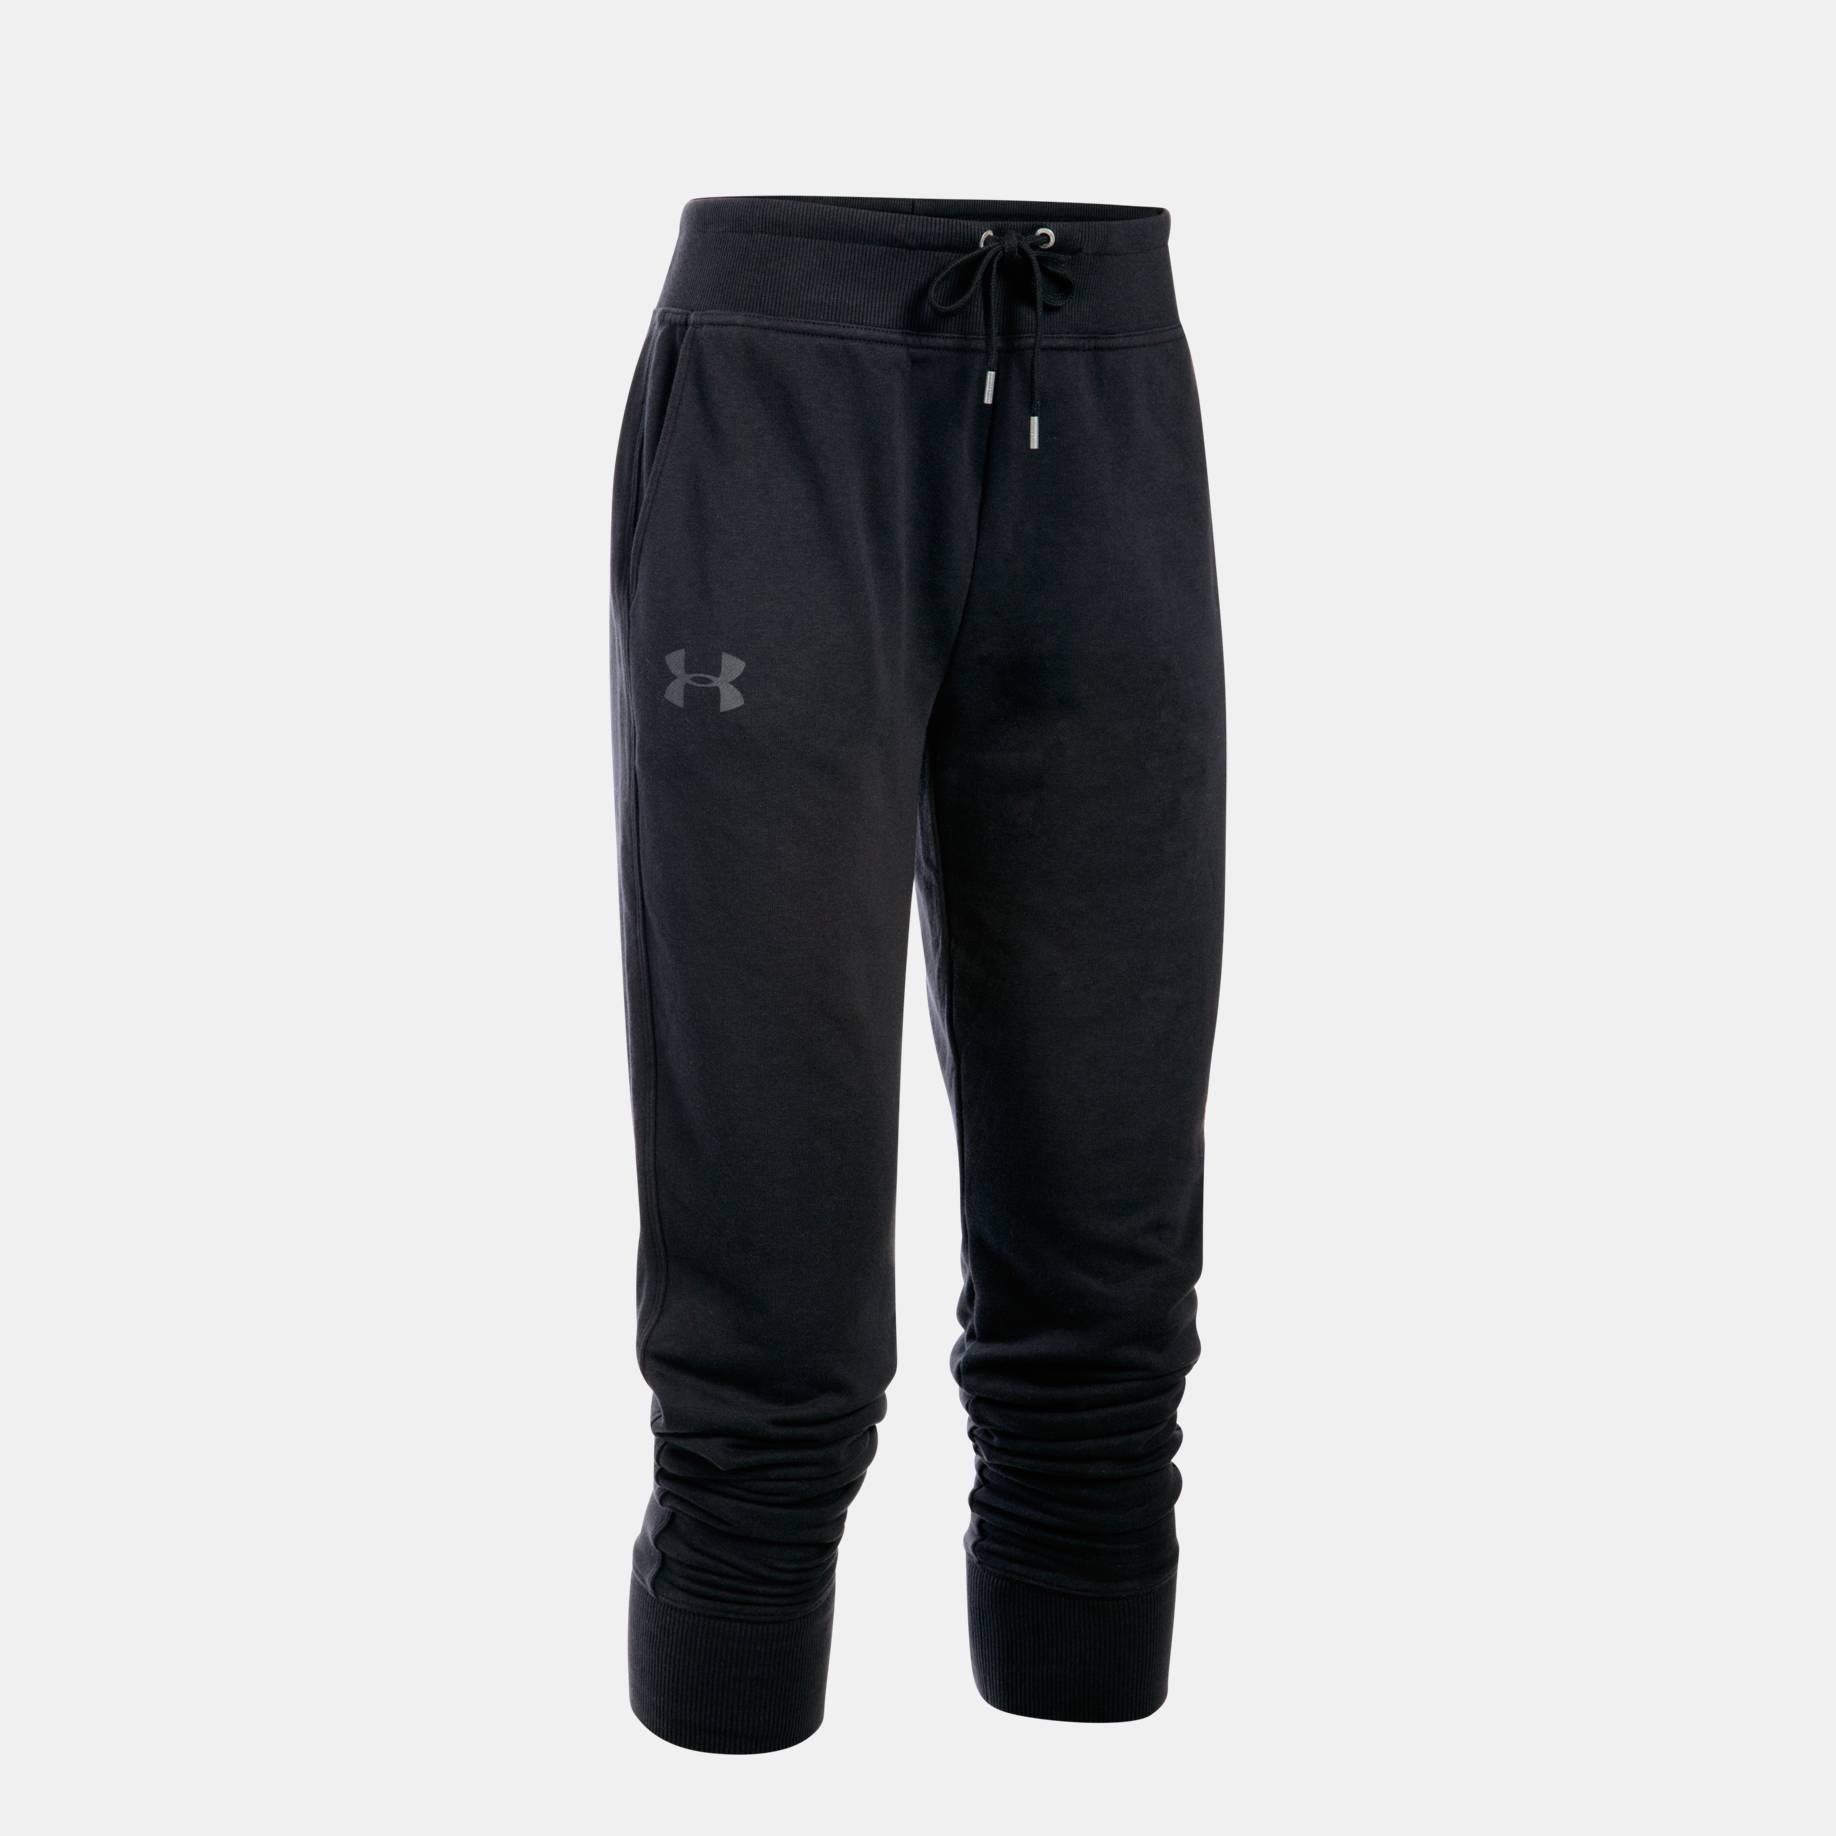  -  under armour Favorite French Terry Pants